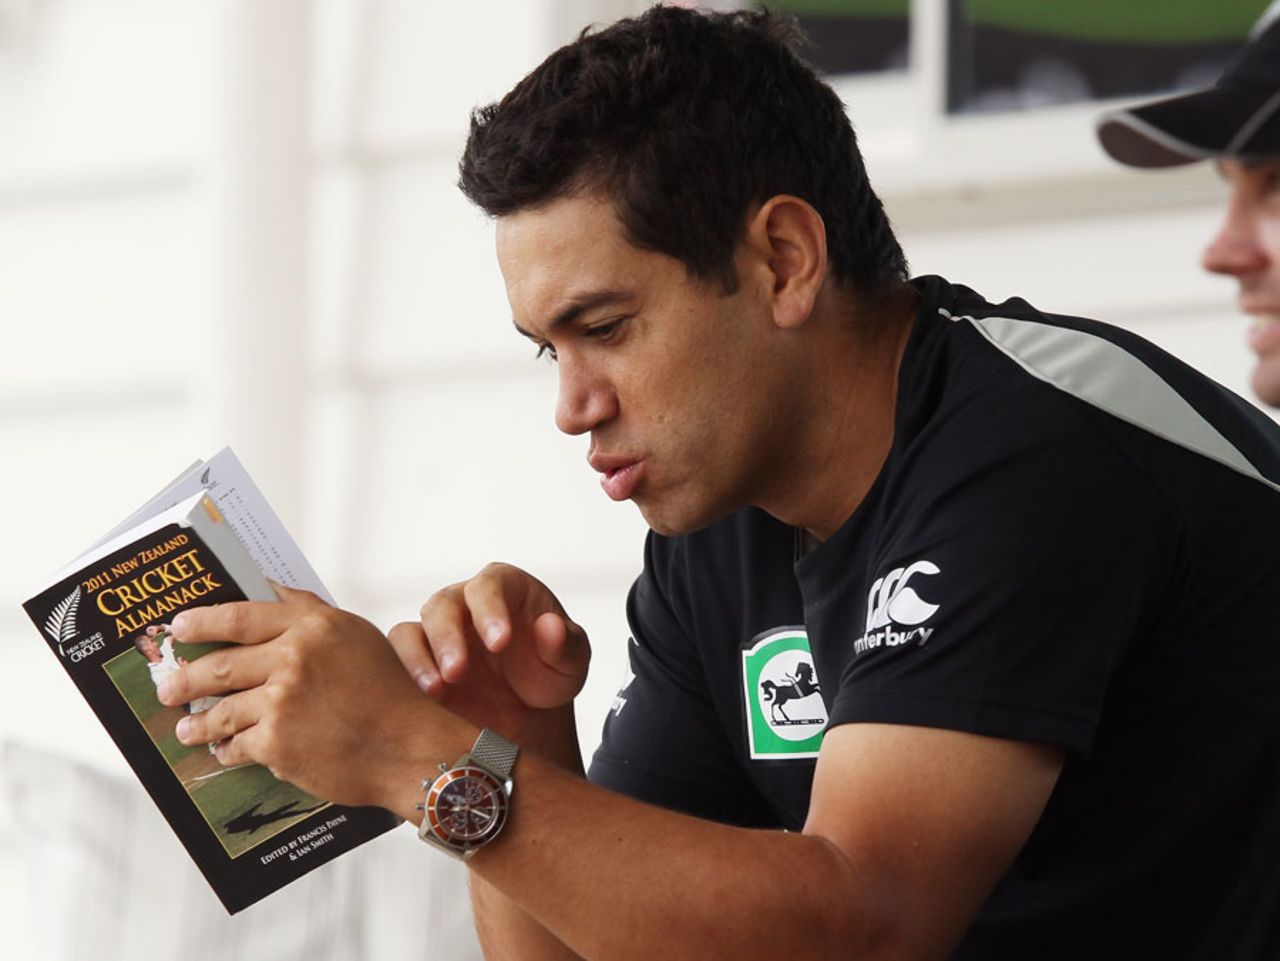 Ross Taylor reads up on his day off, New Zealand v Zimbabwe, 2nd ODI, Whangarei, February 6, 2012